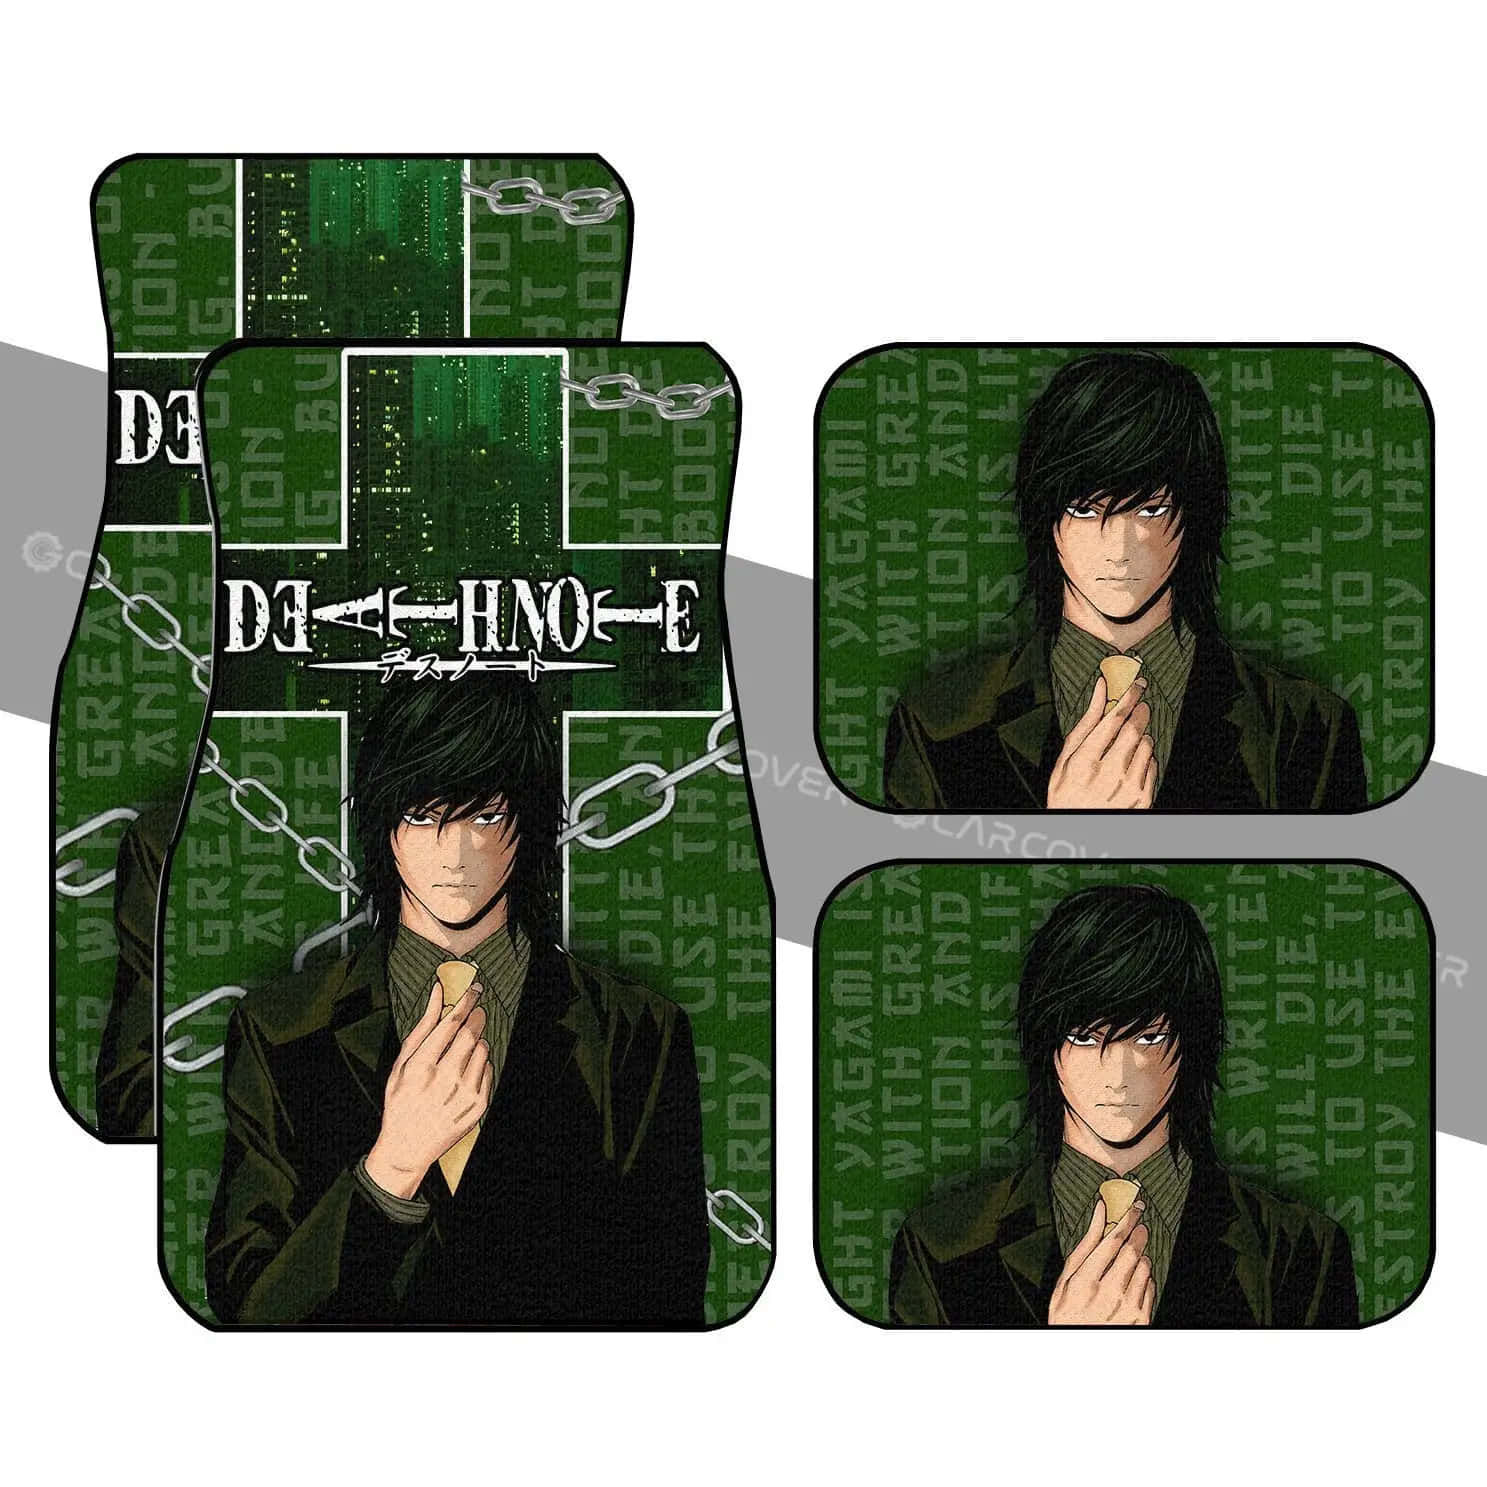 Teru Mikami, a character from the 2003 manga Death Note Wallpaper